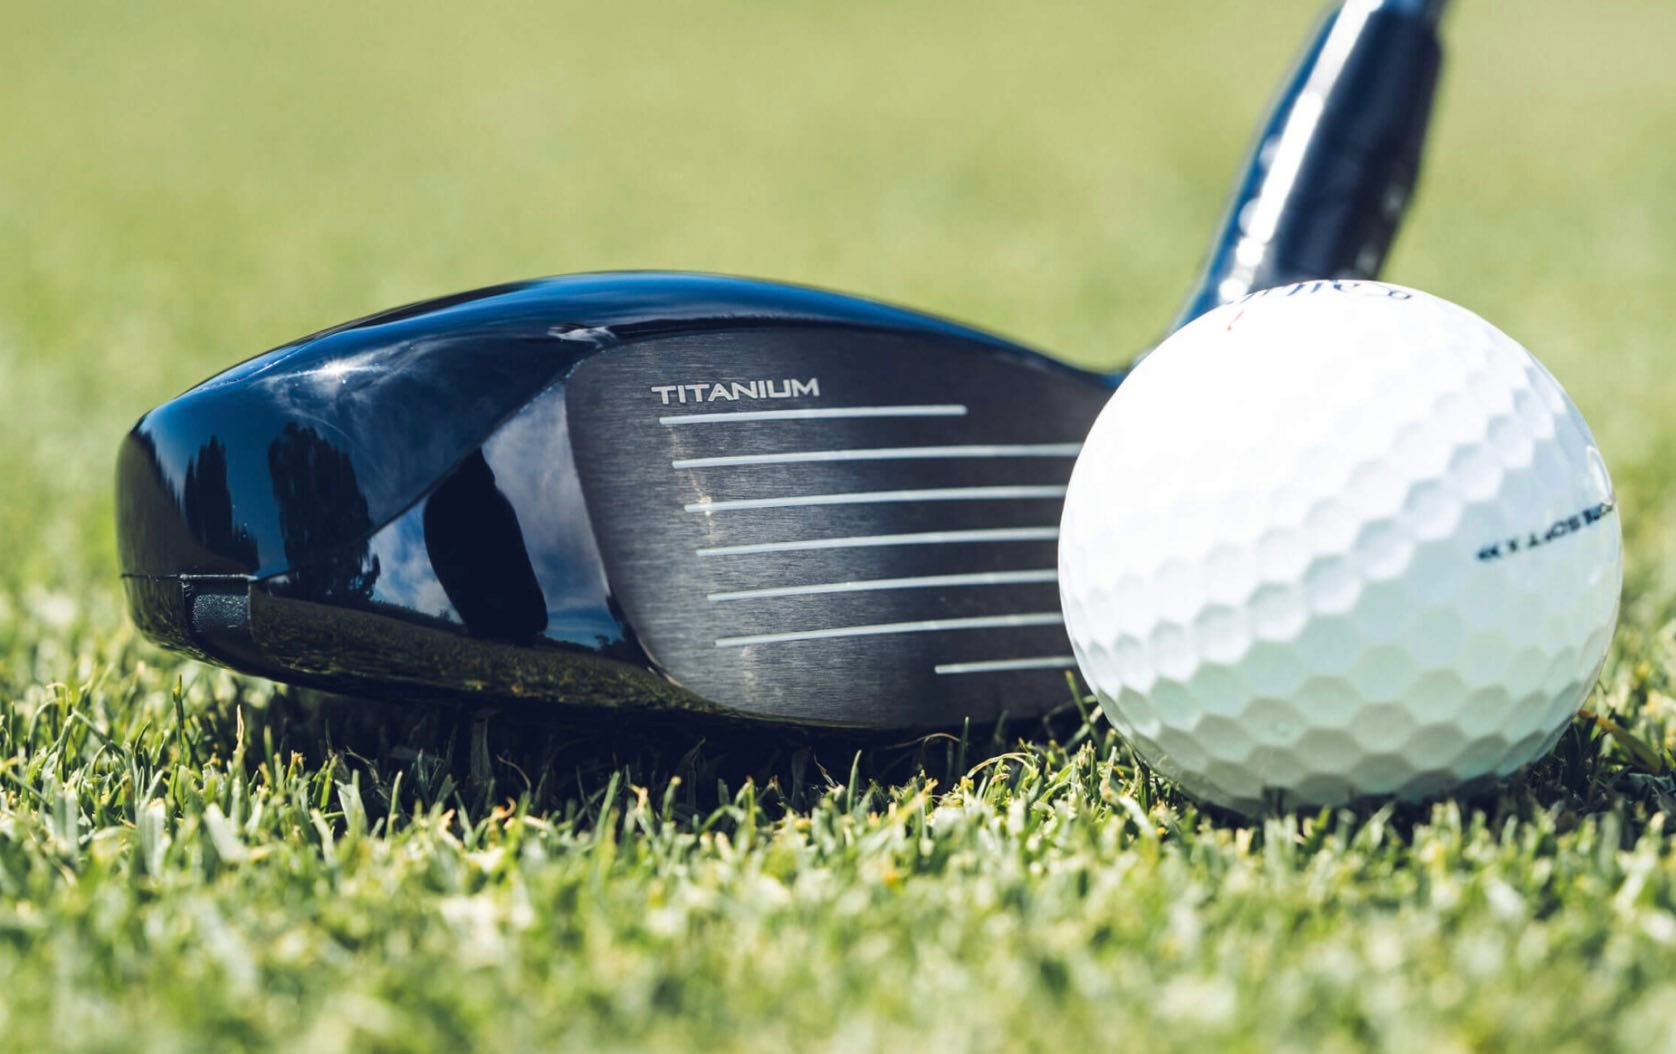 Callaway's newest club is a 'Super Hybrid' with driver technology